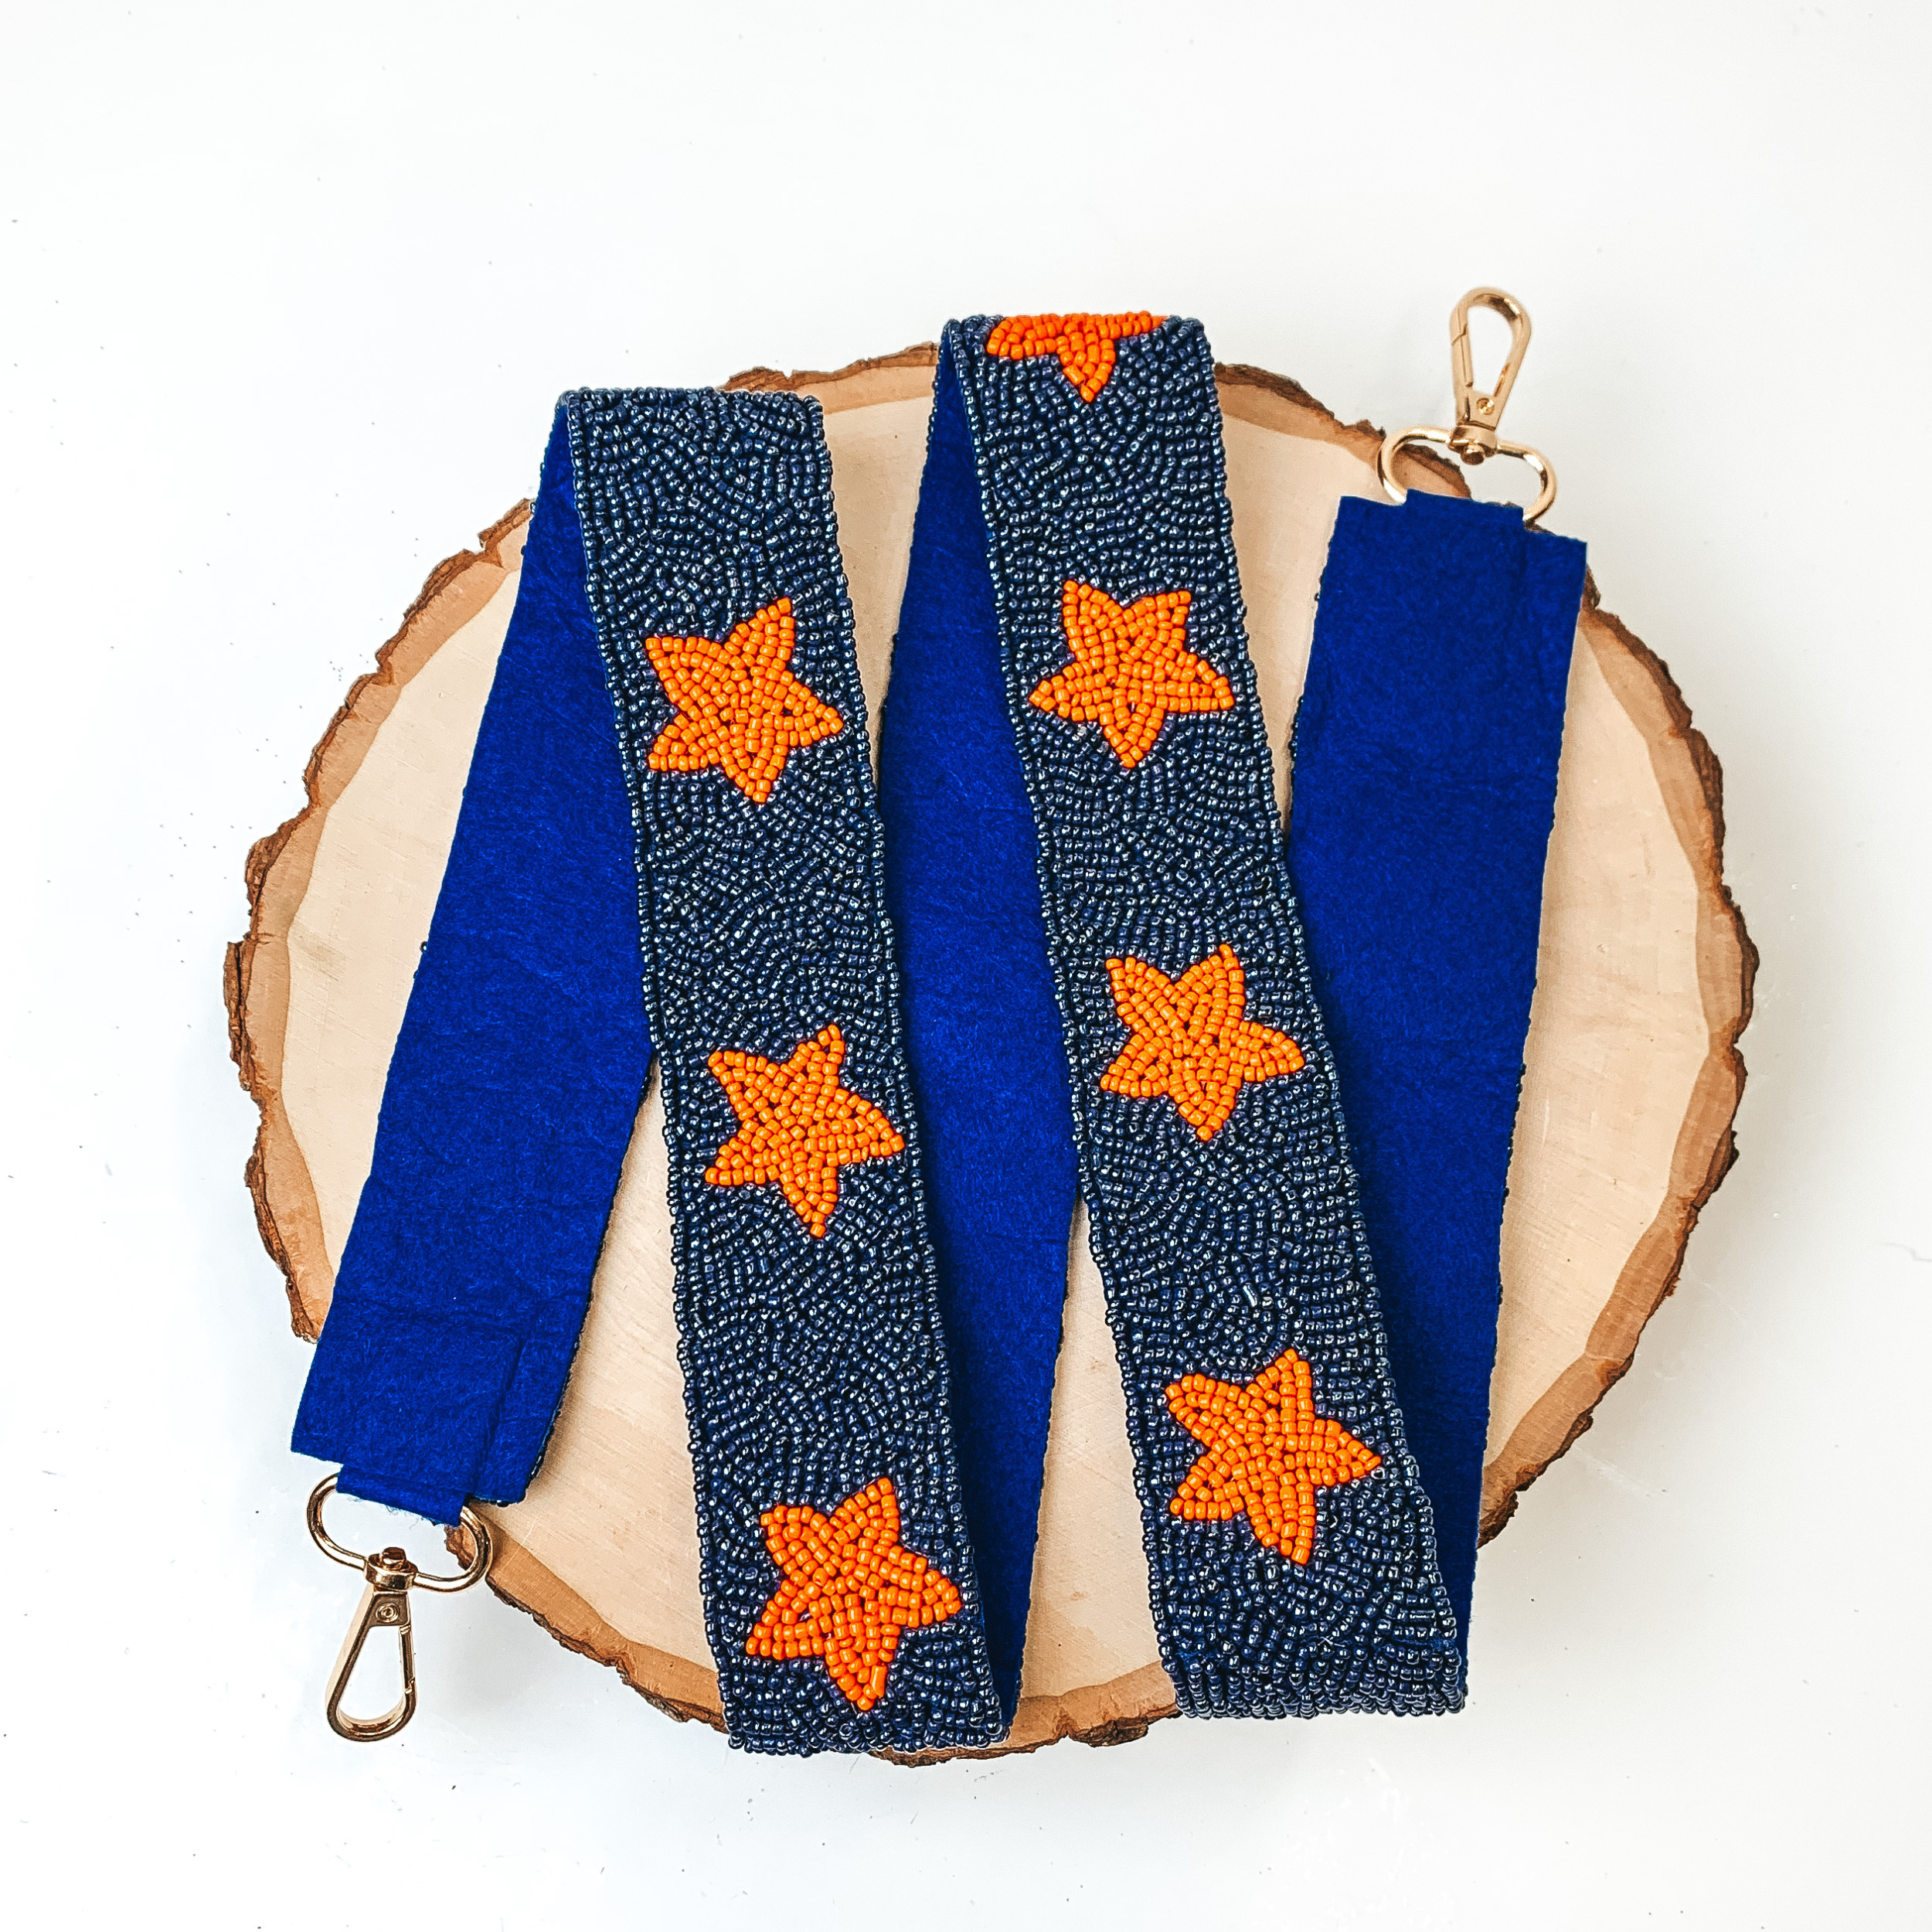 Beaded Orange Stars Purse Strap in Navy Blue, pictured on a piece of wood, with a white background. 